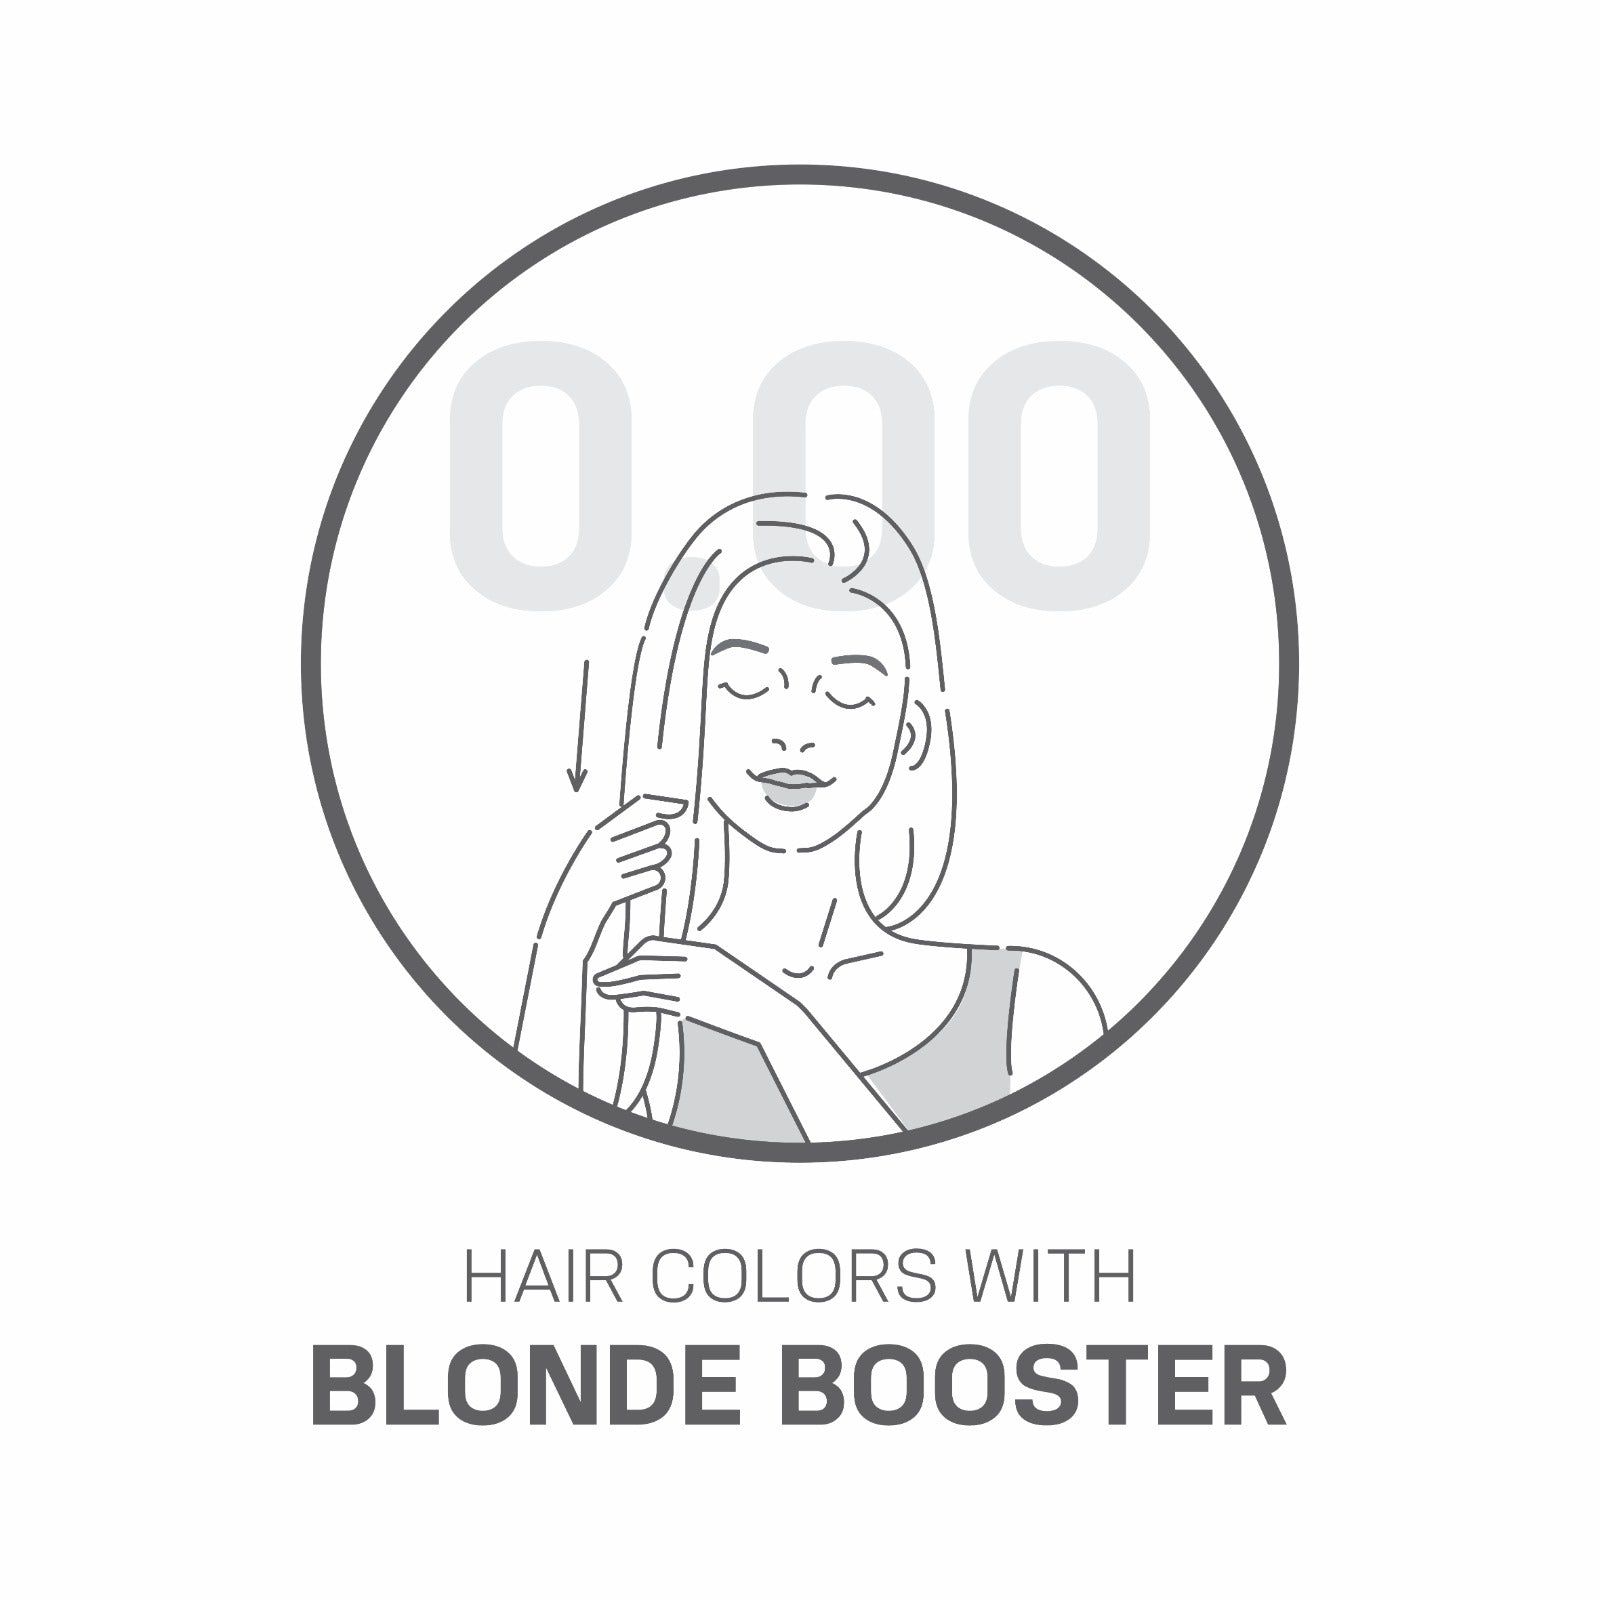 Hair Color Ideas with Blonde Booster